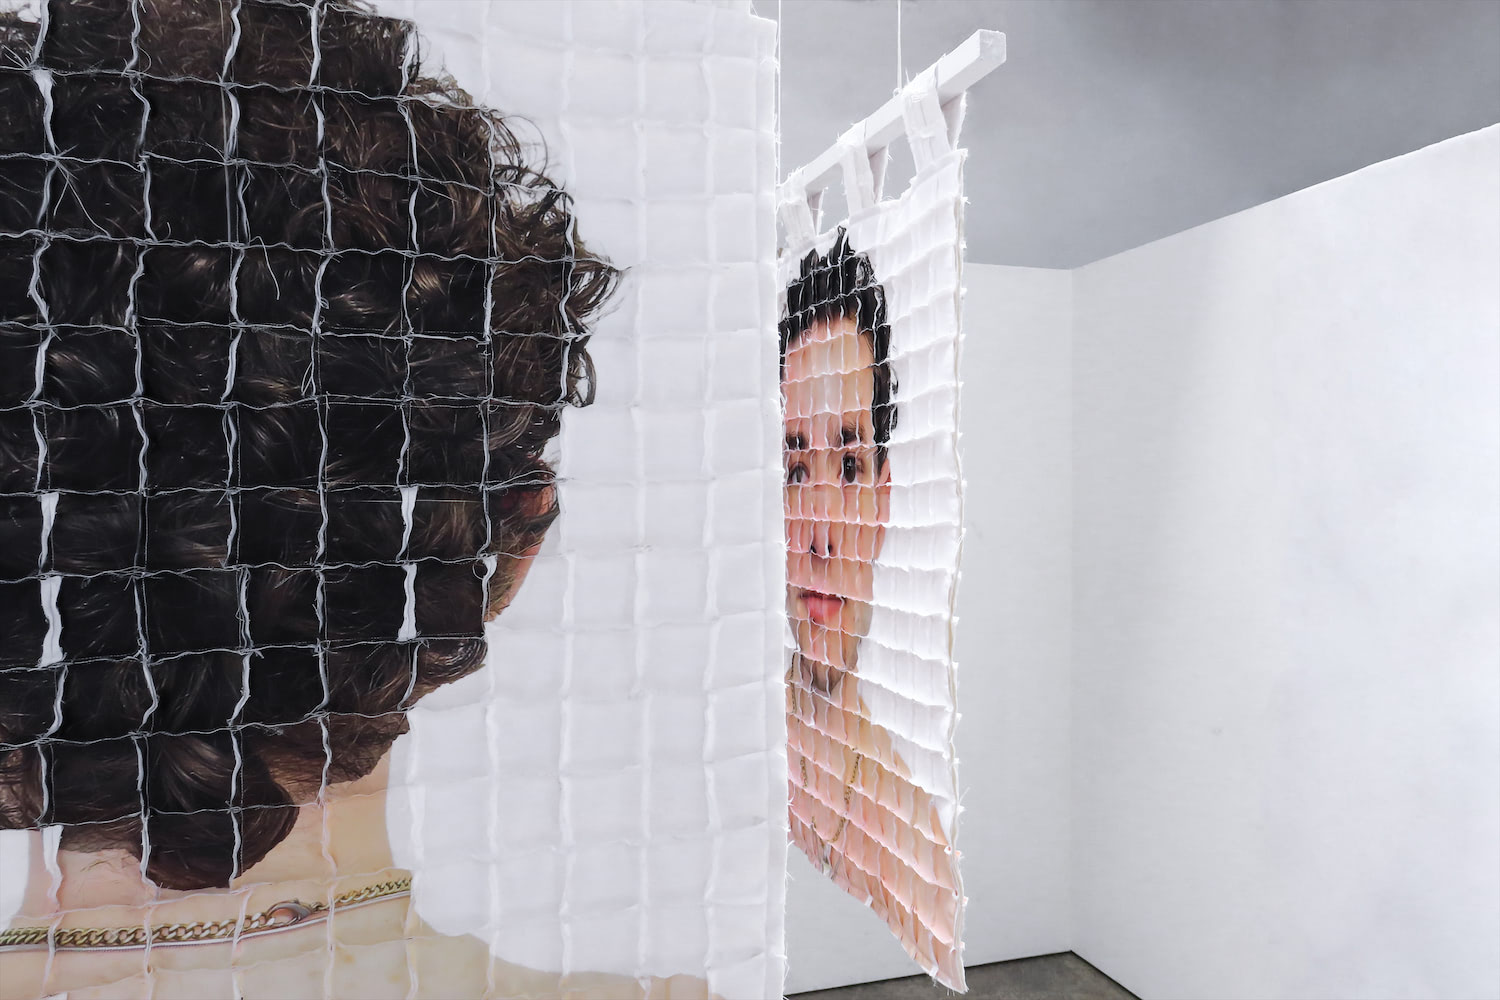 Two quilts are visible. On the left, half of one quilt faces towards the viewer, with the back of the artist's head visible.  On the right is the other quilt, showing the artist's face, distorted, at a severe angle.